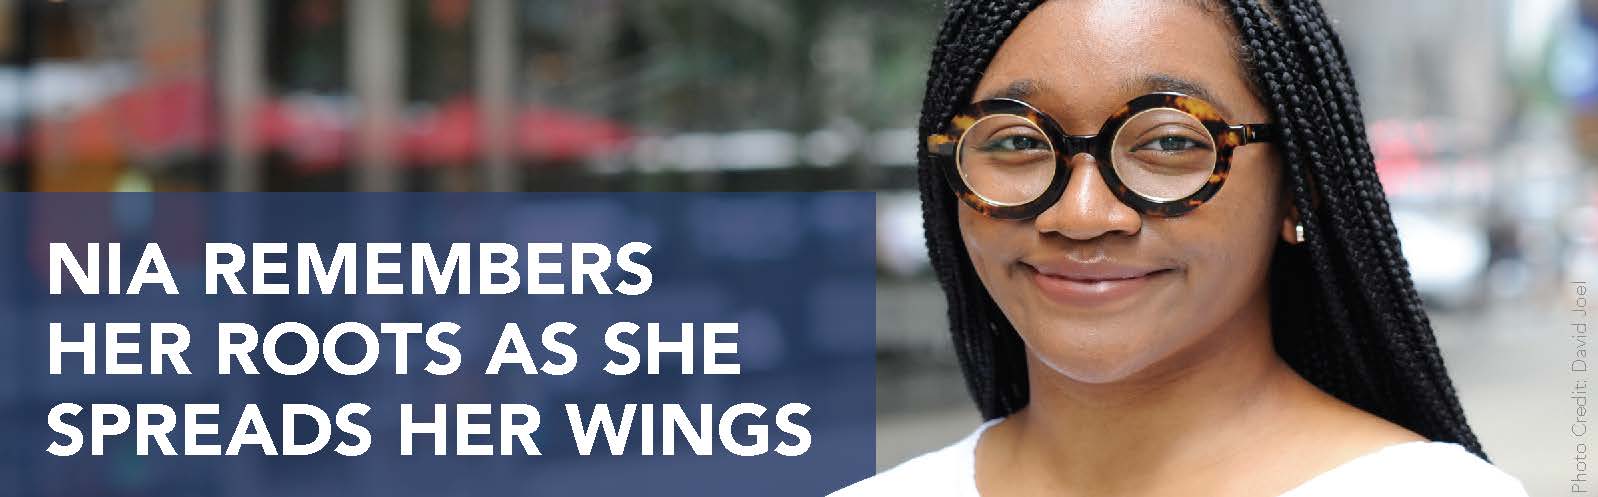 Close-up smiling portrait of Nia Hill, a Black woman in her 20s. She is wearing a white top and large, round, tortoise-shell glasses. Banner text reads: Nia remembers her roots as she spreads her wings.